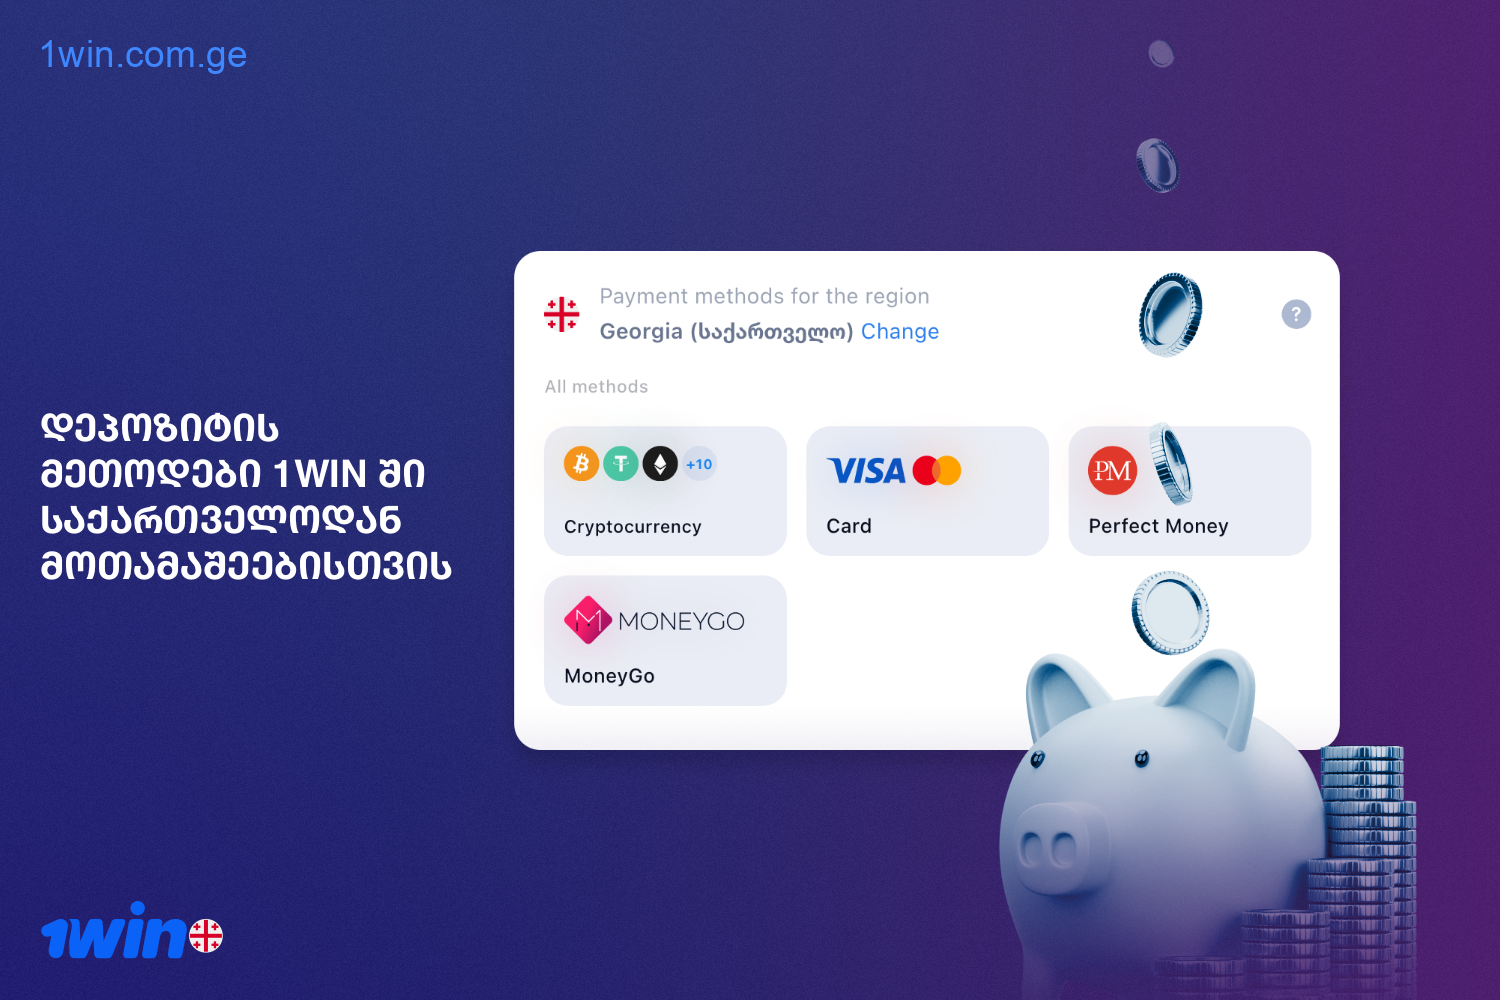 For the convenience of customers from Georgia, 1win offers several deposit options